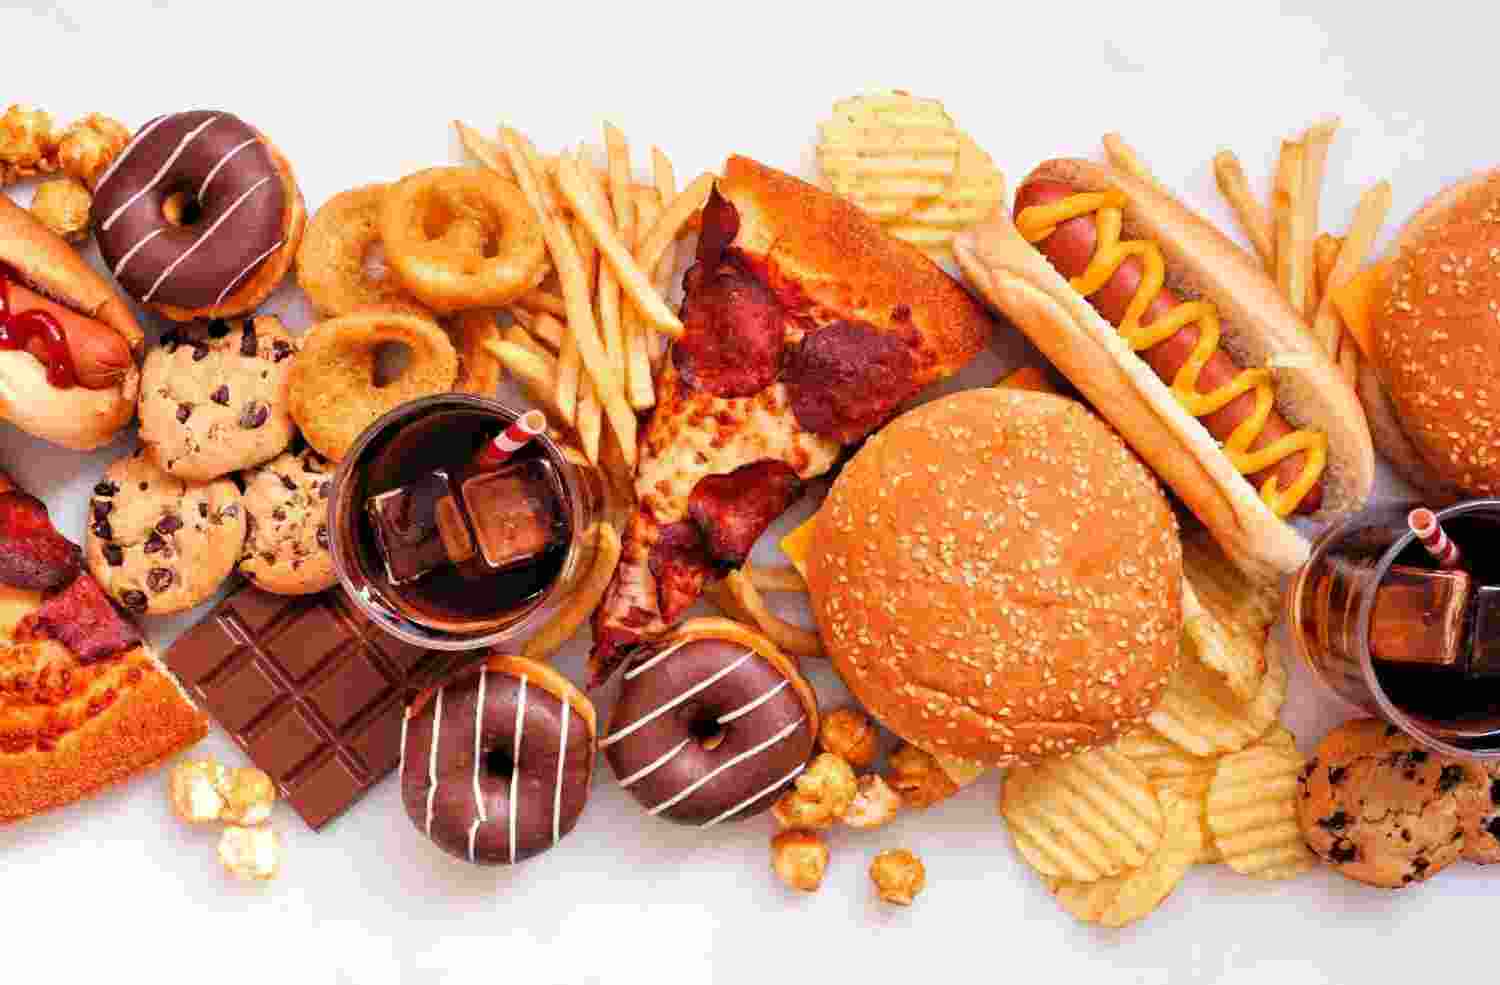 Ultra-processed food consumption increases death risk from respiratory conditions